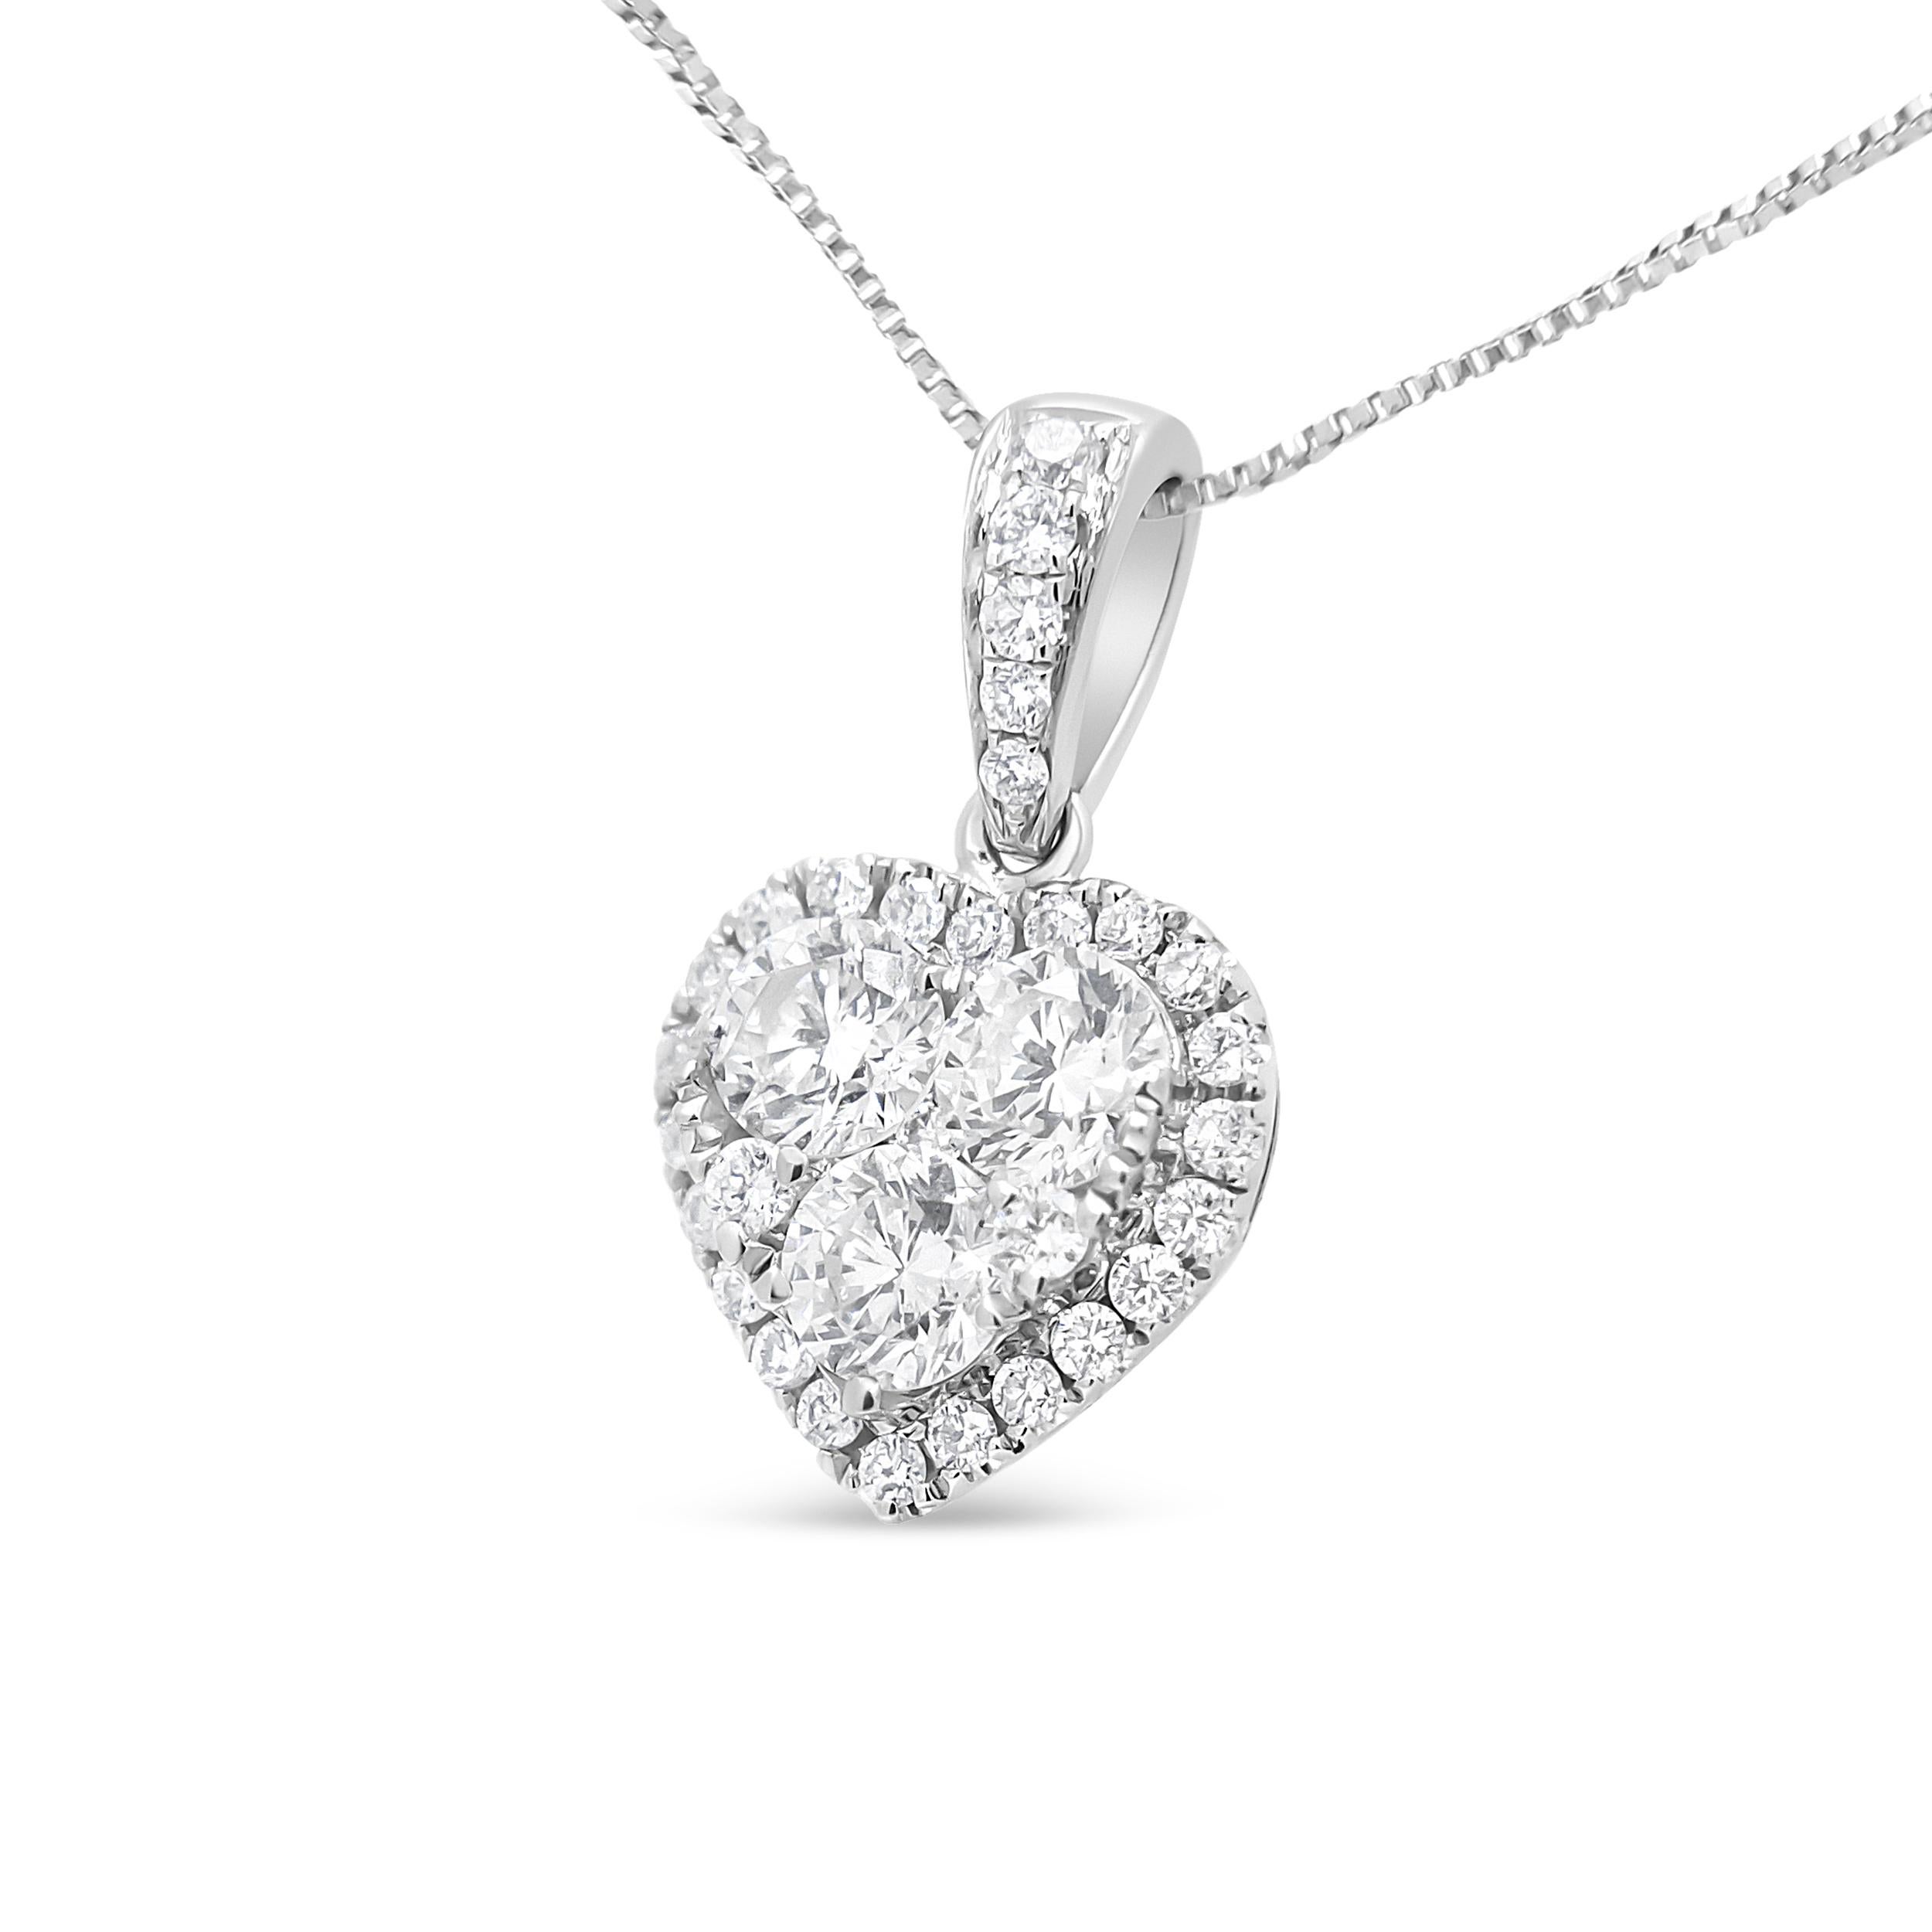 This sweet diamond cluster pendant necklace sparks romantic thoughts in a glittering heart silhouette. This gorgeous 18k white gold heart pendant is perfect for heartfelt gift-giving, sparkling with a total of 5/8 cttw round white diamonds of